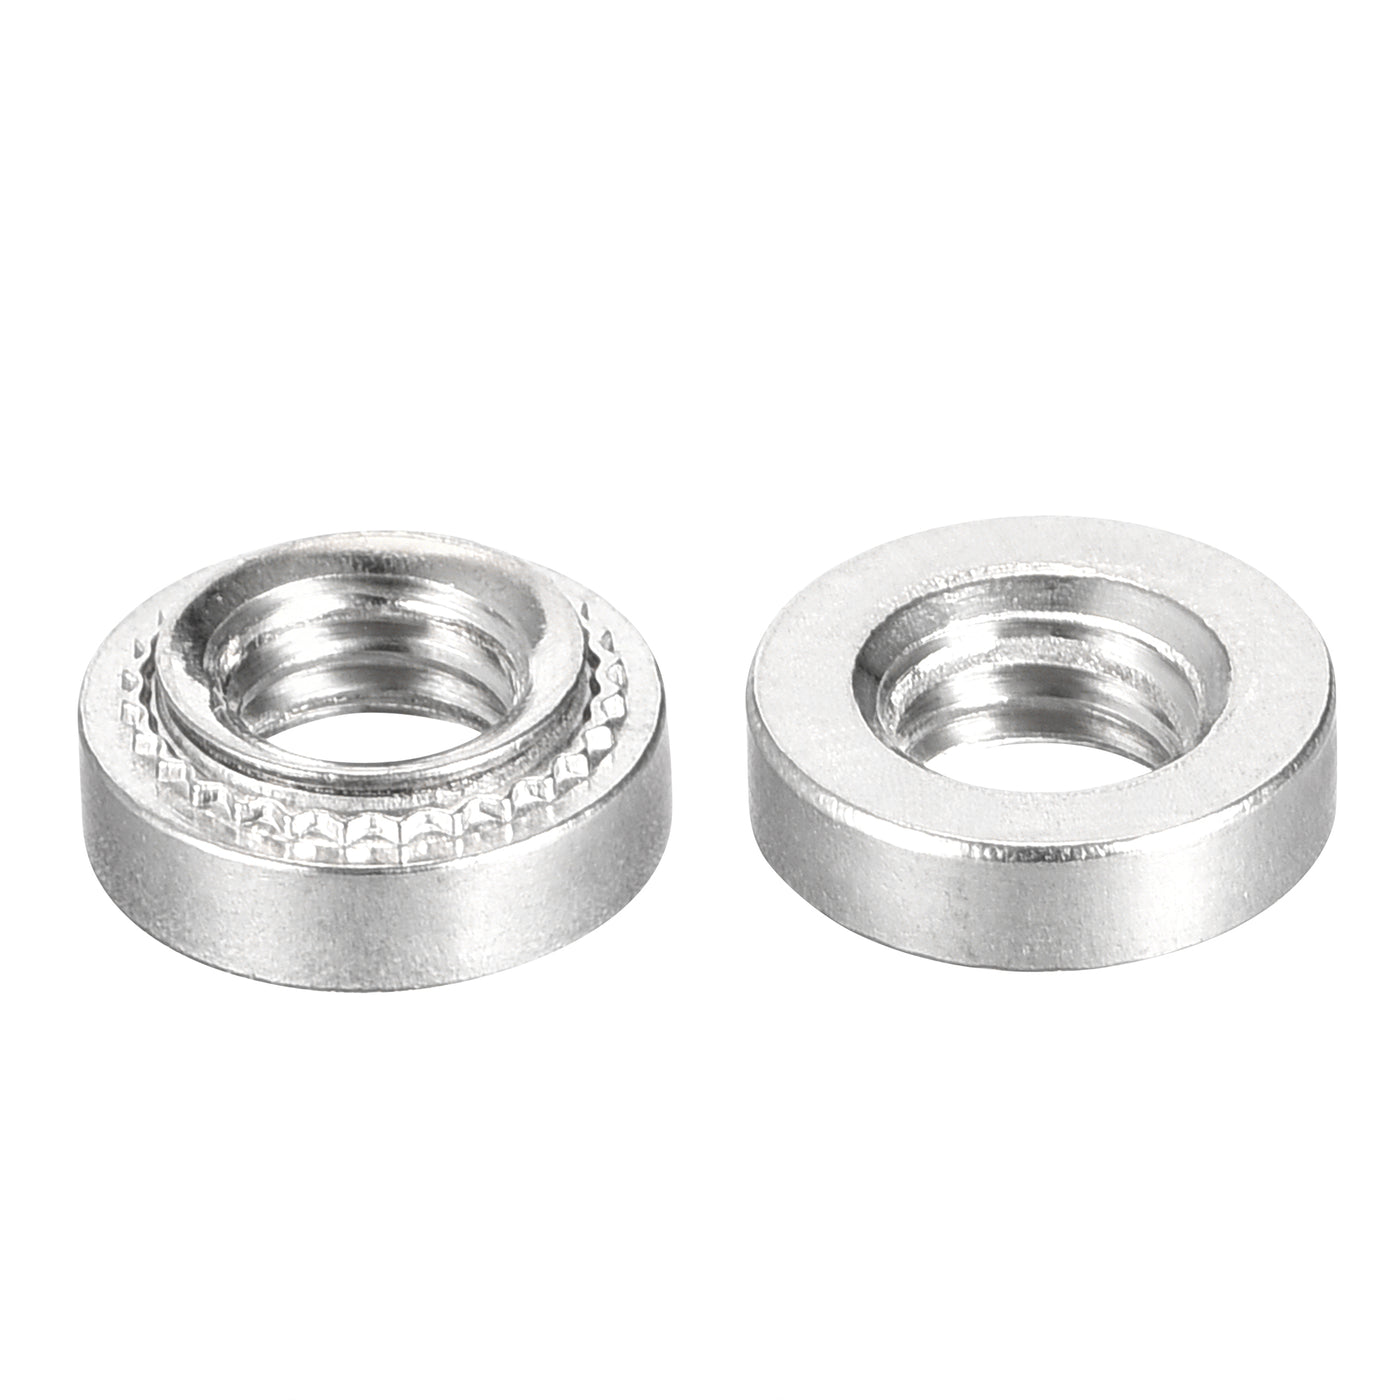 uxcell Uxcell Self -Clinching Nuts, Steel Rivet Nuts Fastener Hardware for Thin Sheet